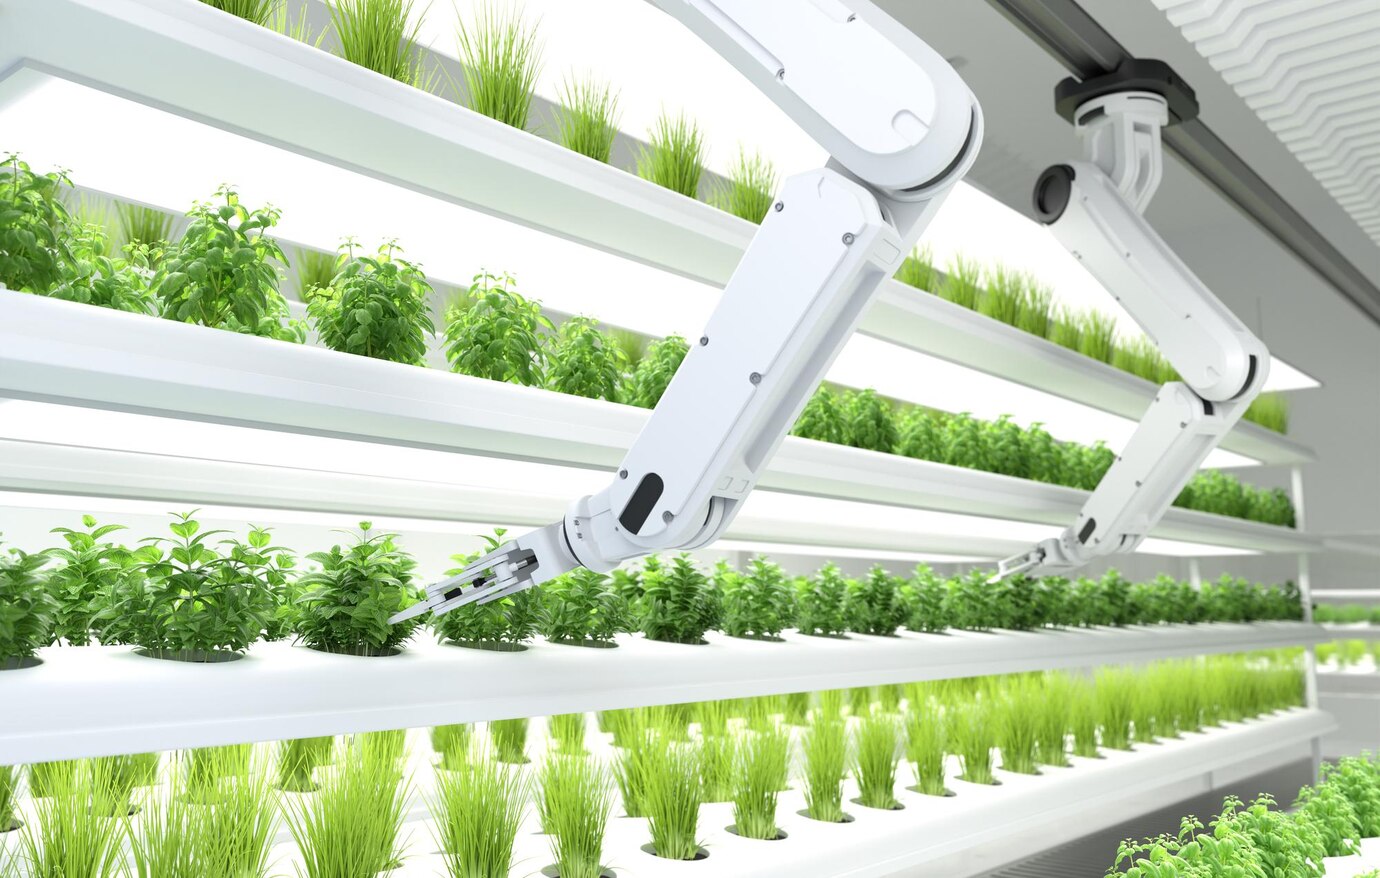 Cyber-Physical Systems in Agriculture: Smart Farming for Sustainable Food Production | physical, technology